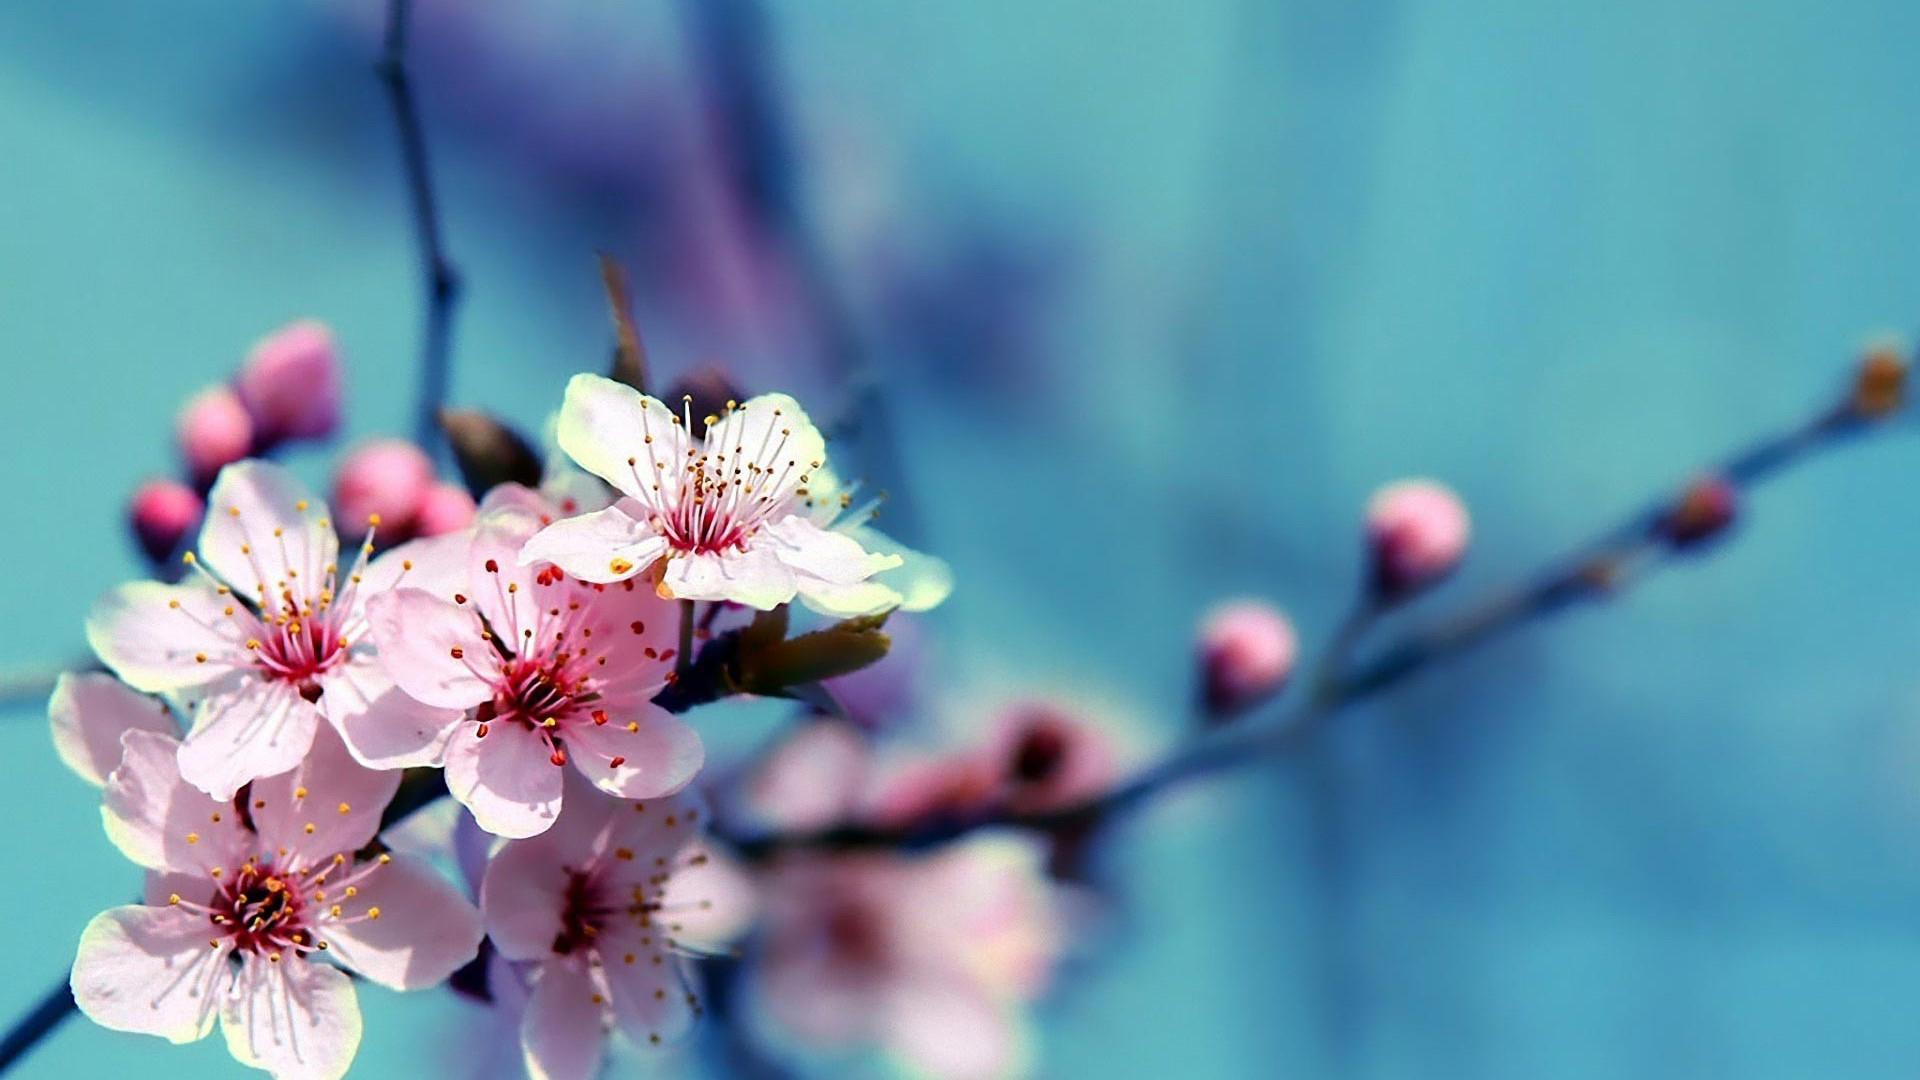 Flowers Cherry Blossom Wallpapers